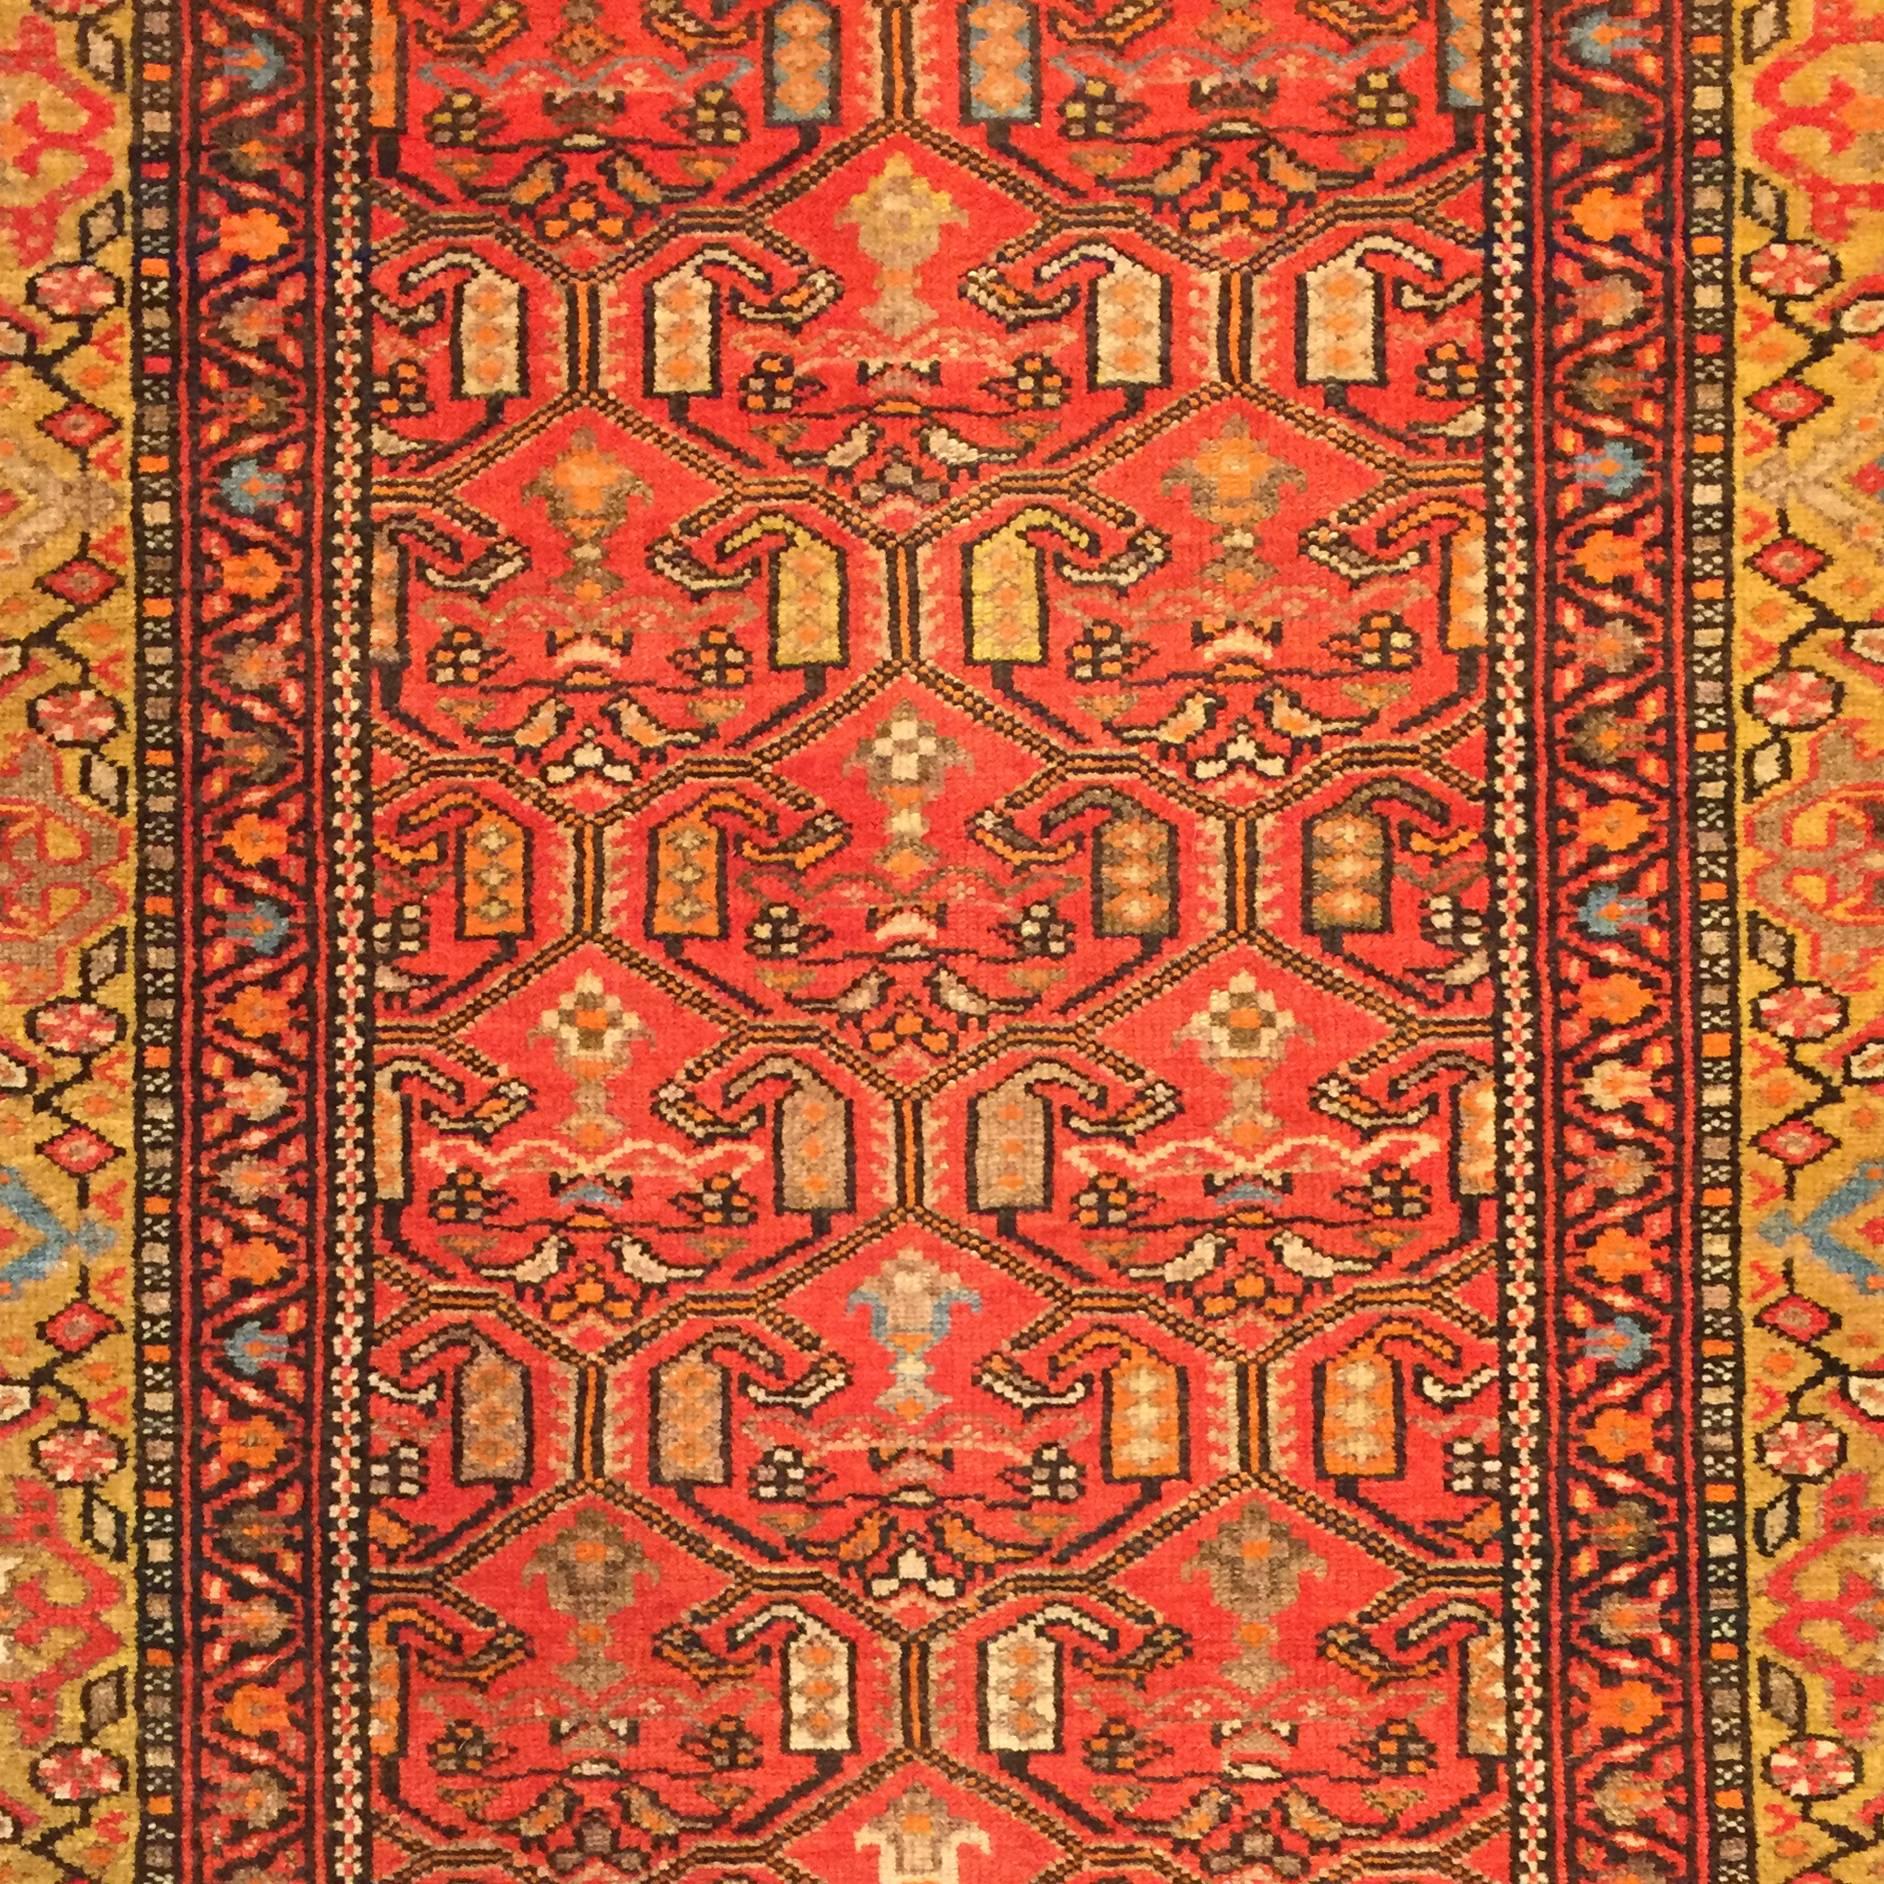 A late 19th century Persian Malayer runner with a gorgeous vegetable dyed crimson central field, layered with indigo, saffron and yellow scrolling vines and paisleys, birds and flowers, surrounded by multiple contrasting borders of alternating vines